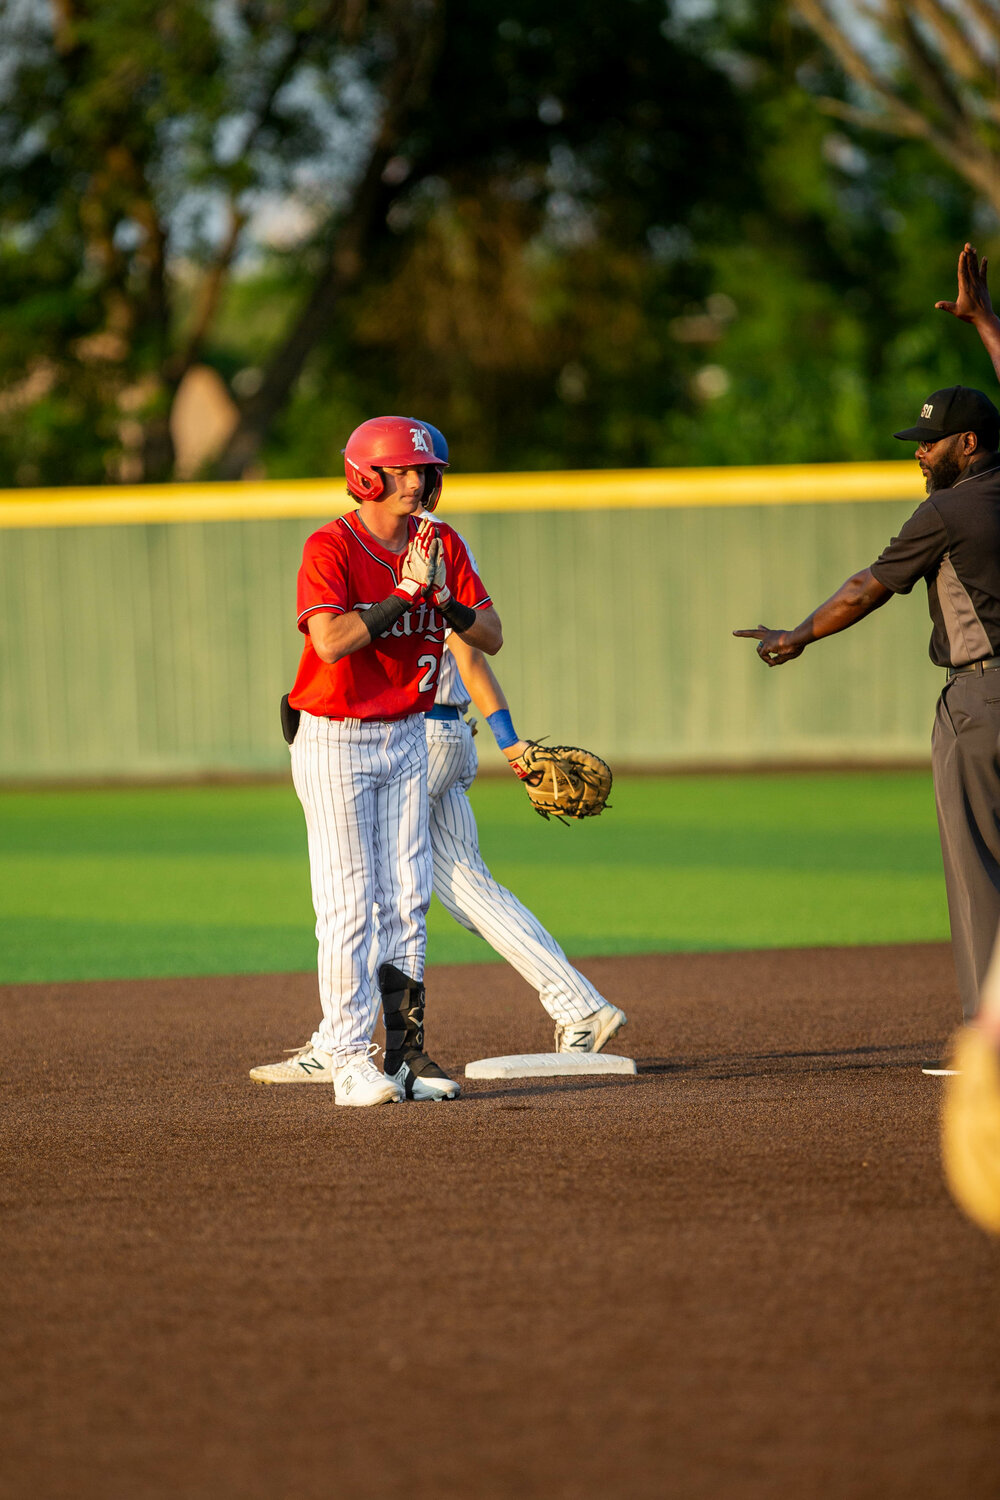 Sutton Hull celbrates after a hit during Wednesday's Regional Semifinal between Katy and Clear Springs at Deer Park.